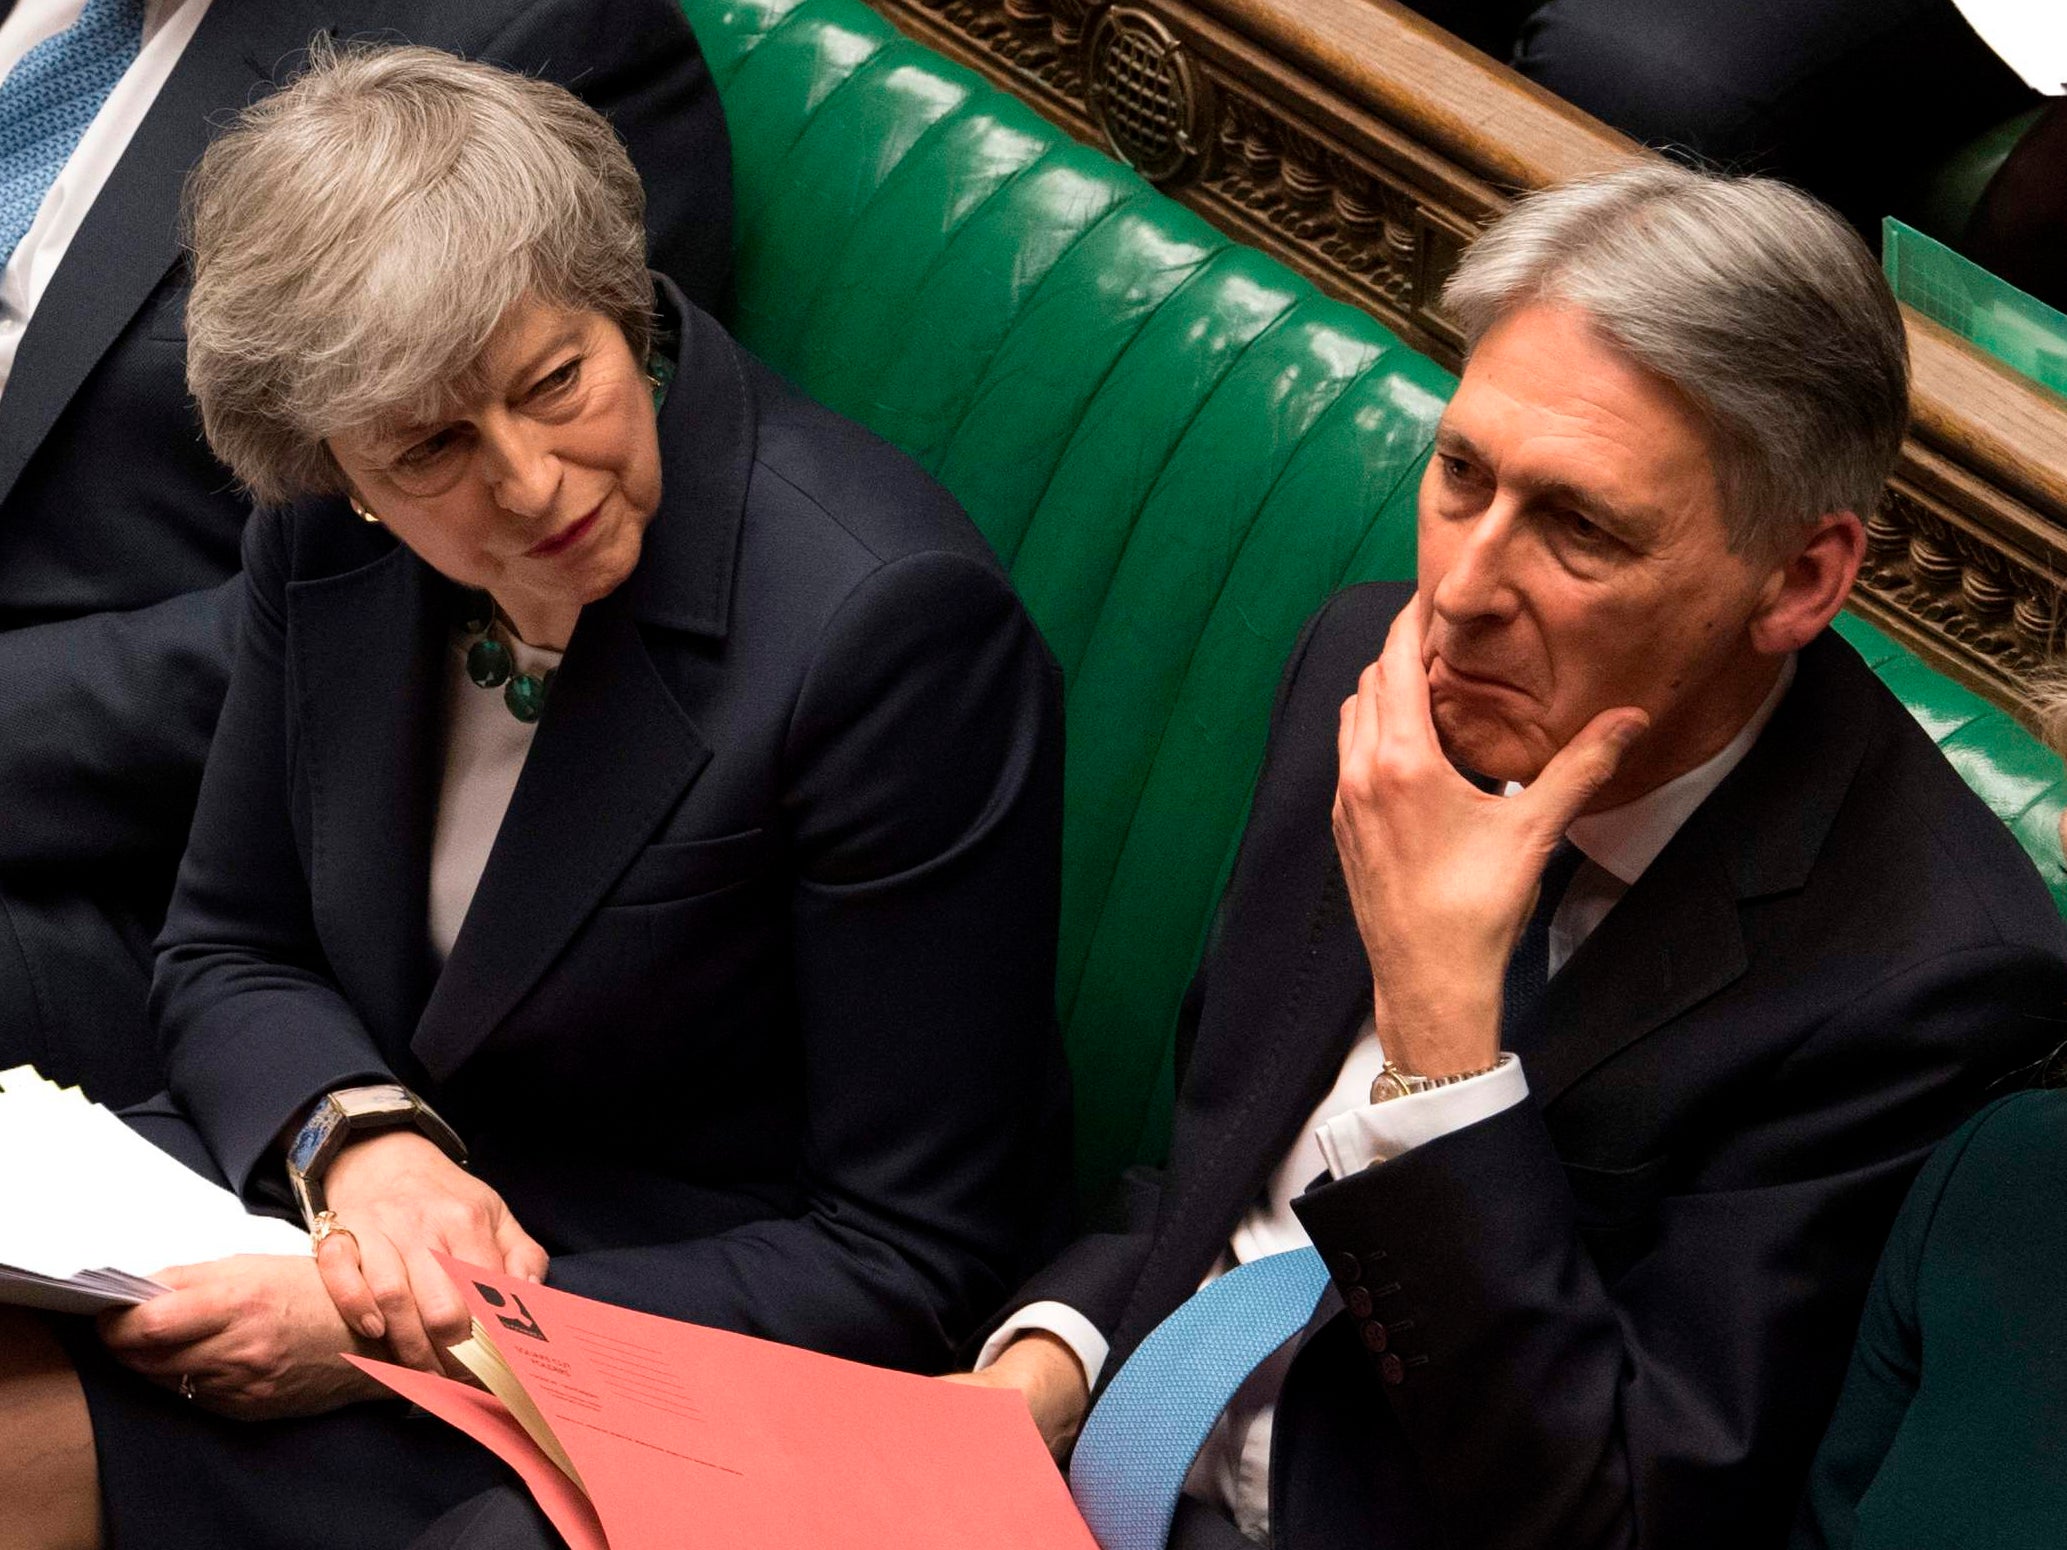 Philip Hammond has boasted about the 25 consecutive quarters of growth. His successor may have to explain why the streak is ending